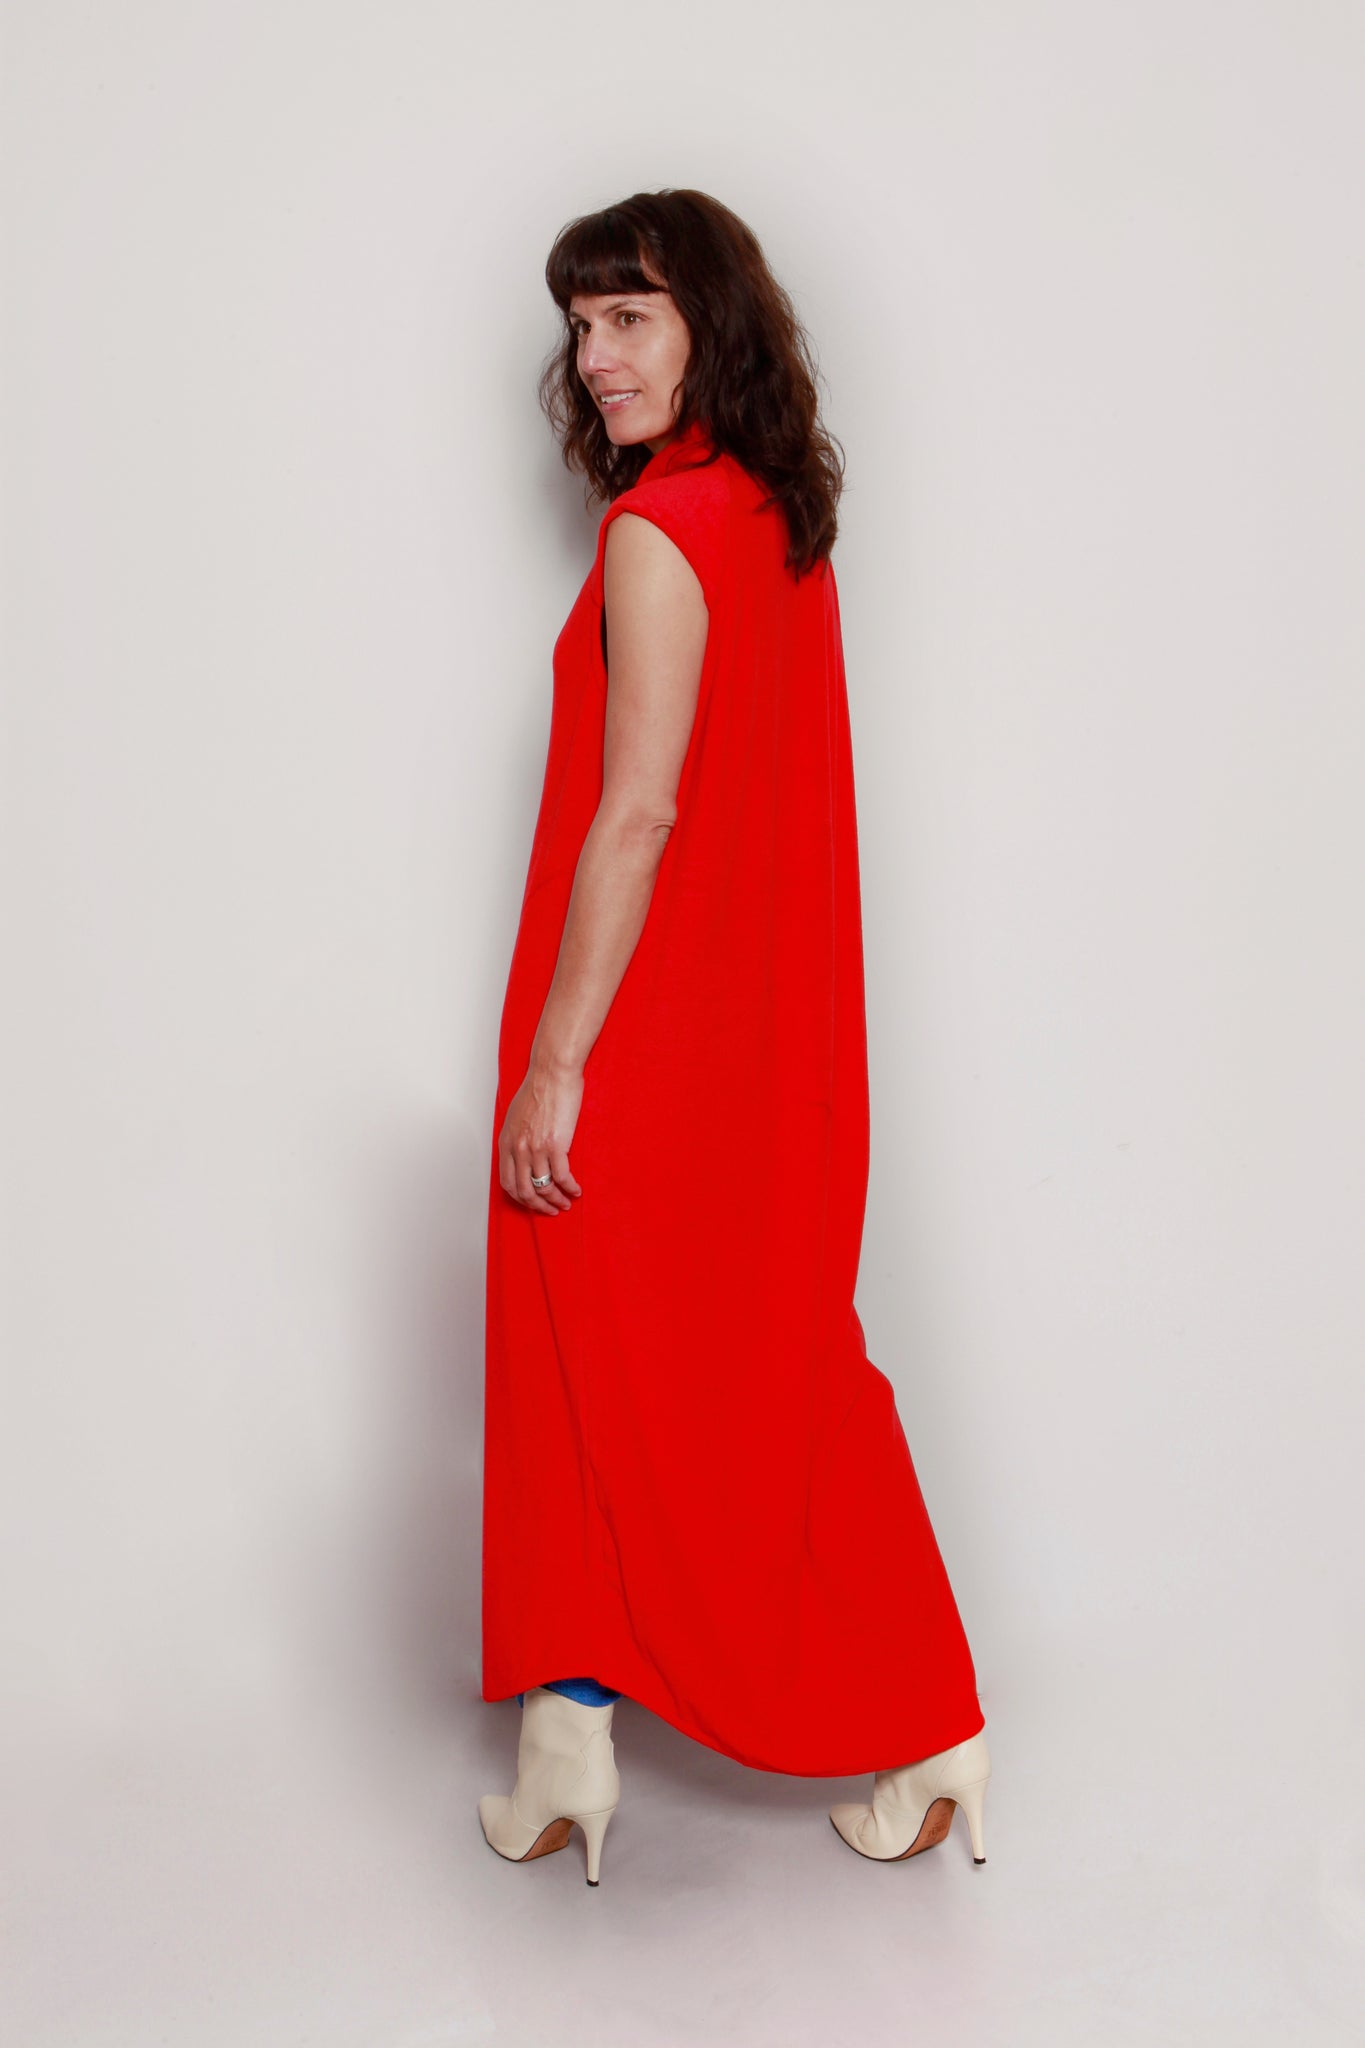 Kaftan Liberall. Style: Donnie - unisex, no sleeve, red. Photo by Eva Roefs.